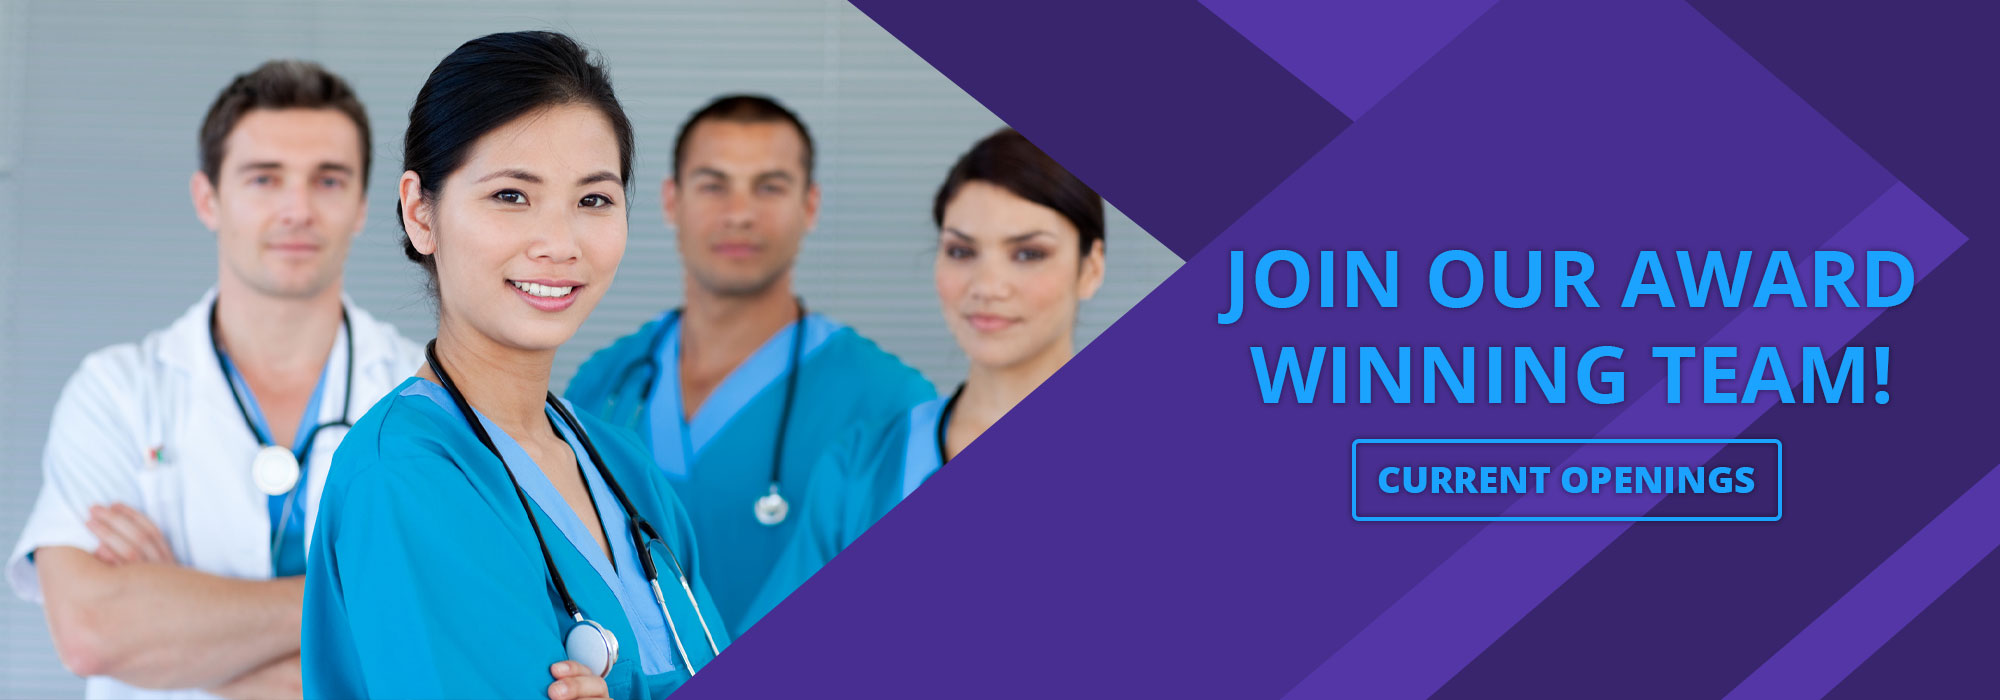 Banner picture of four Medical Professionals (two females and two males) smiling. Banner says:

JOIN OUR AWARD WINNING TEAM!
CURRENT OPENINGS